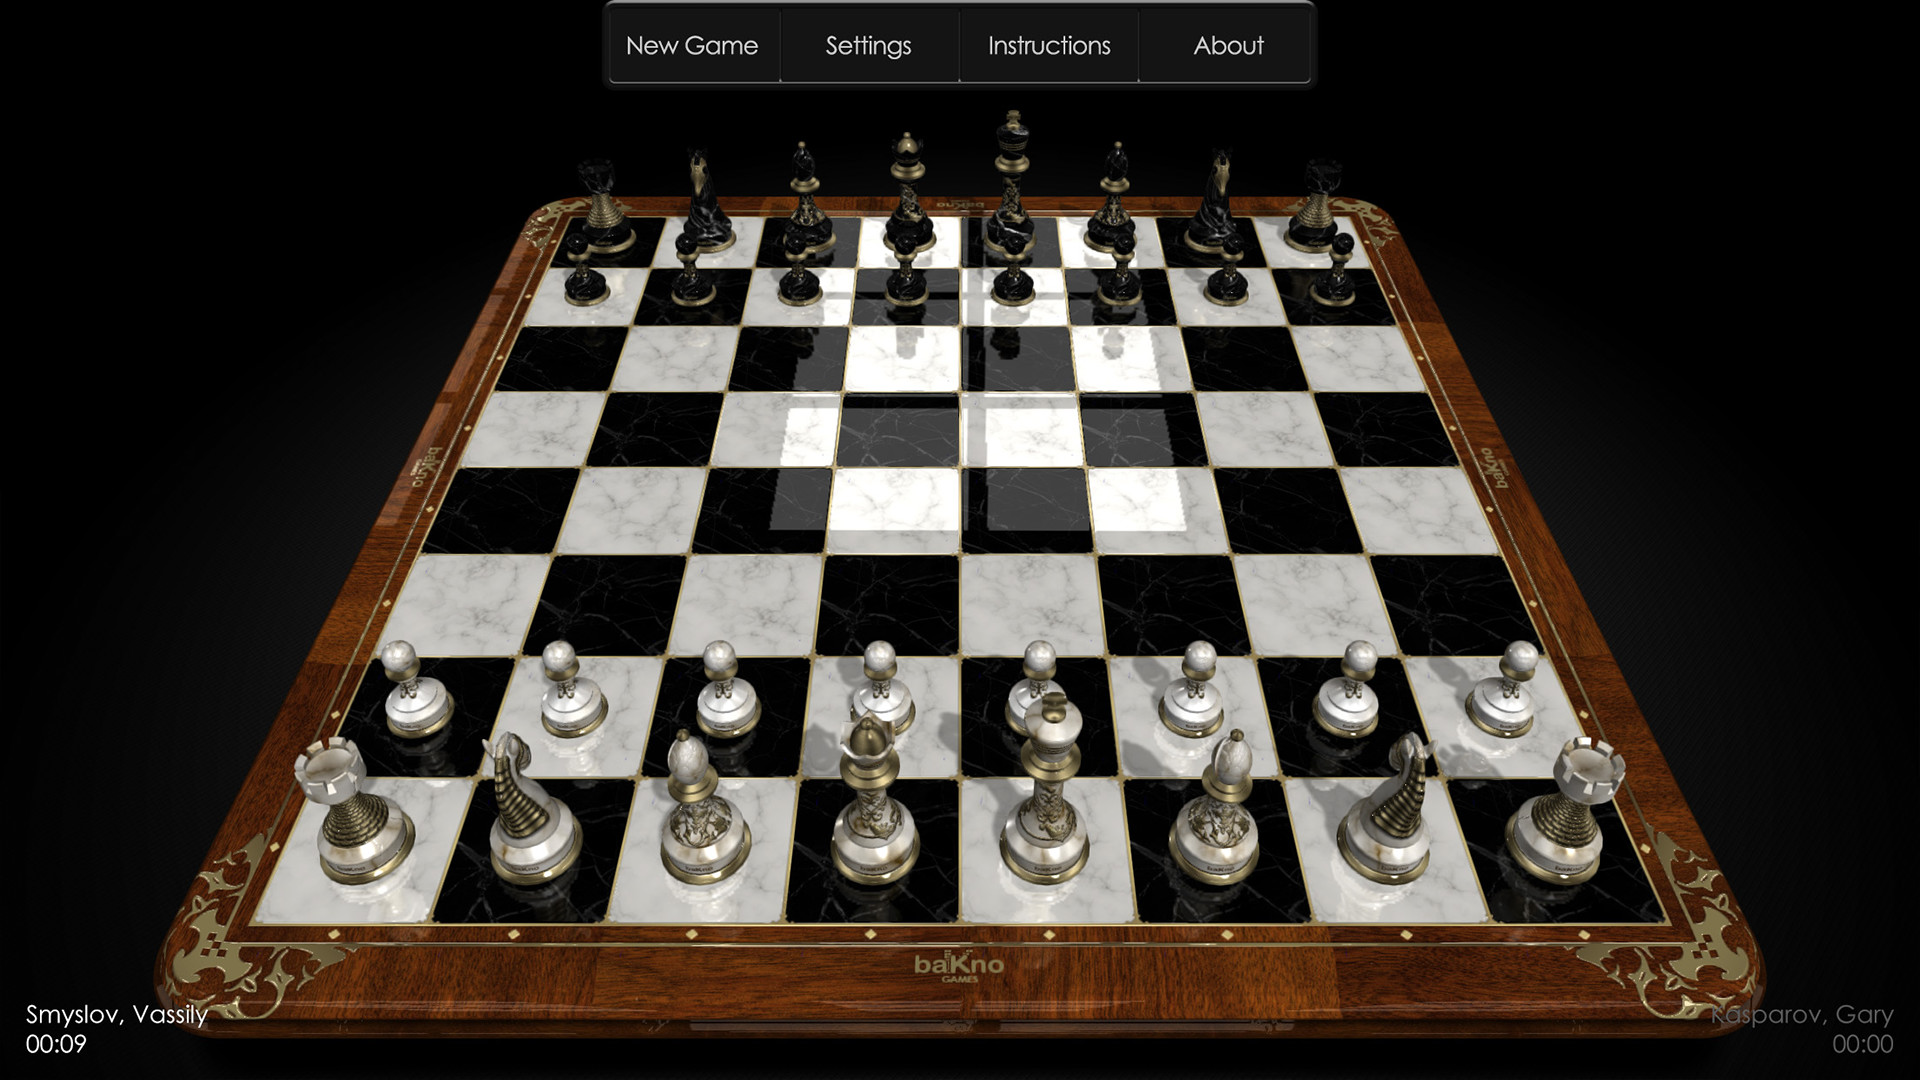 free online chess games for beginners